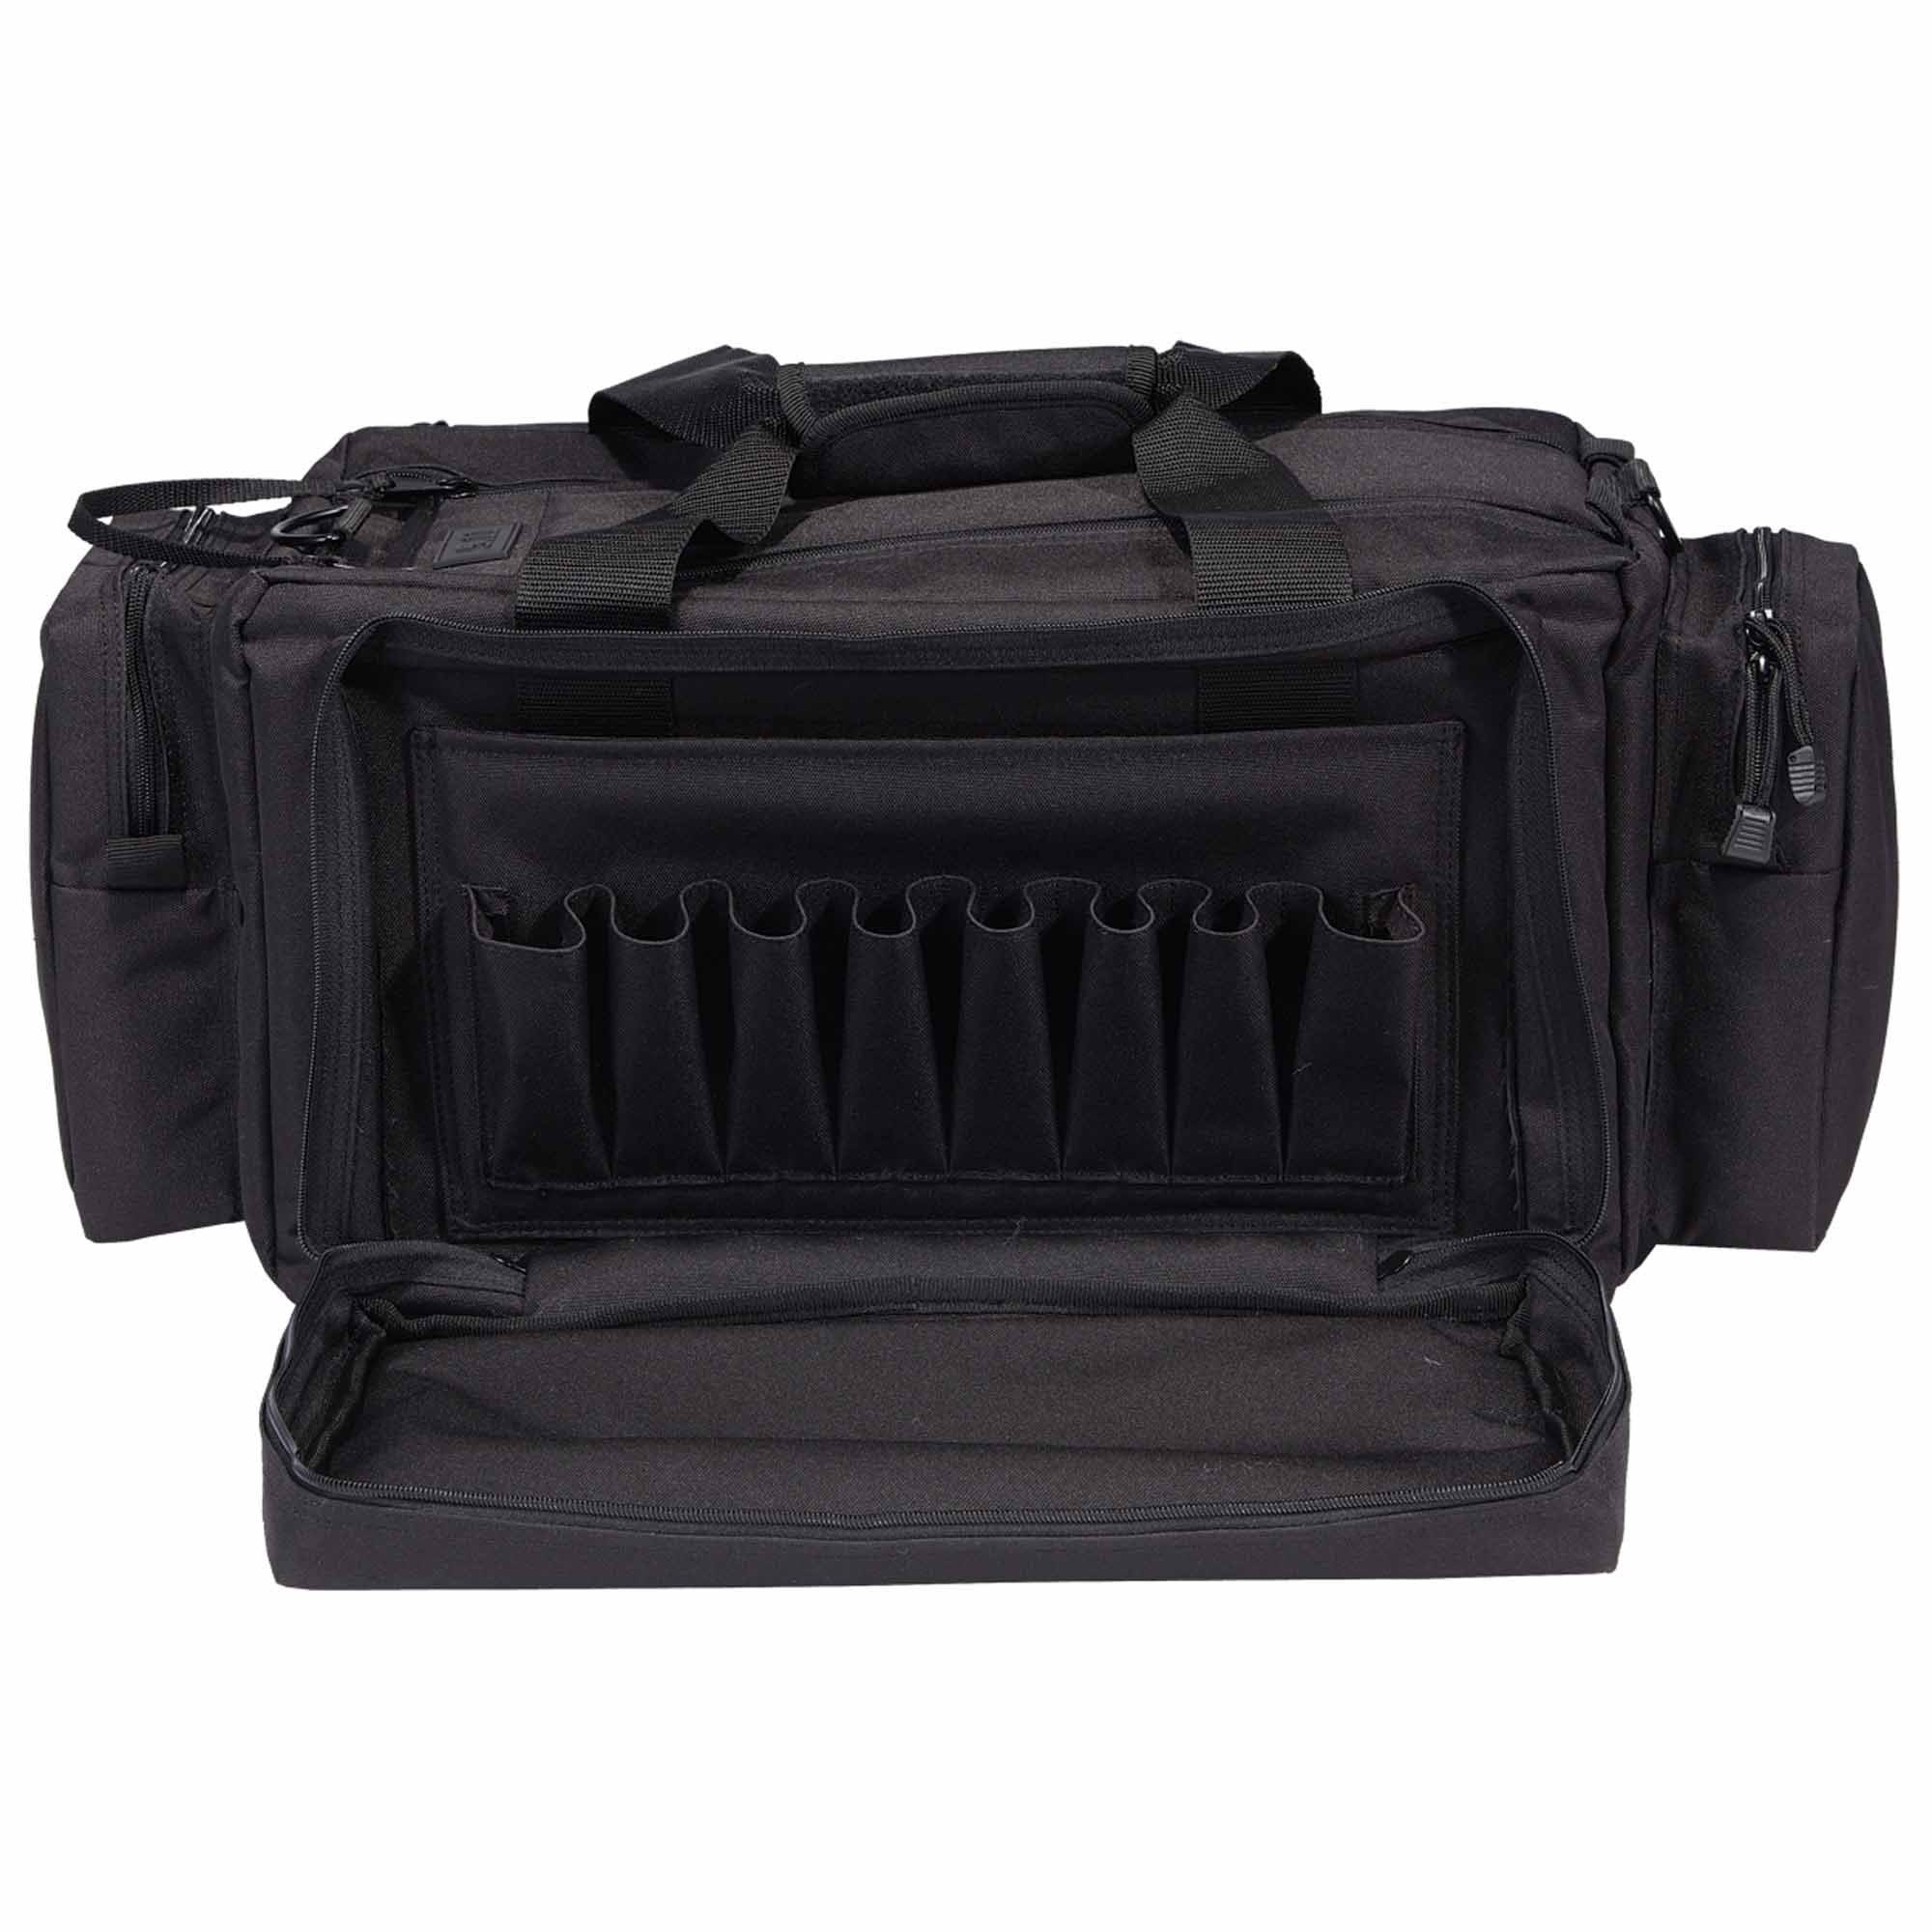 5.11 Tactical Range Ready Bag Bags, Packs and Cases 5.11 Tactical Black Tactical Gear Supplier Tactical Distributors Australia